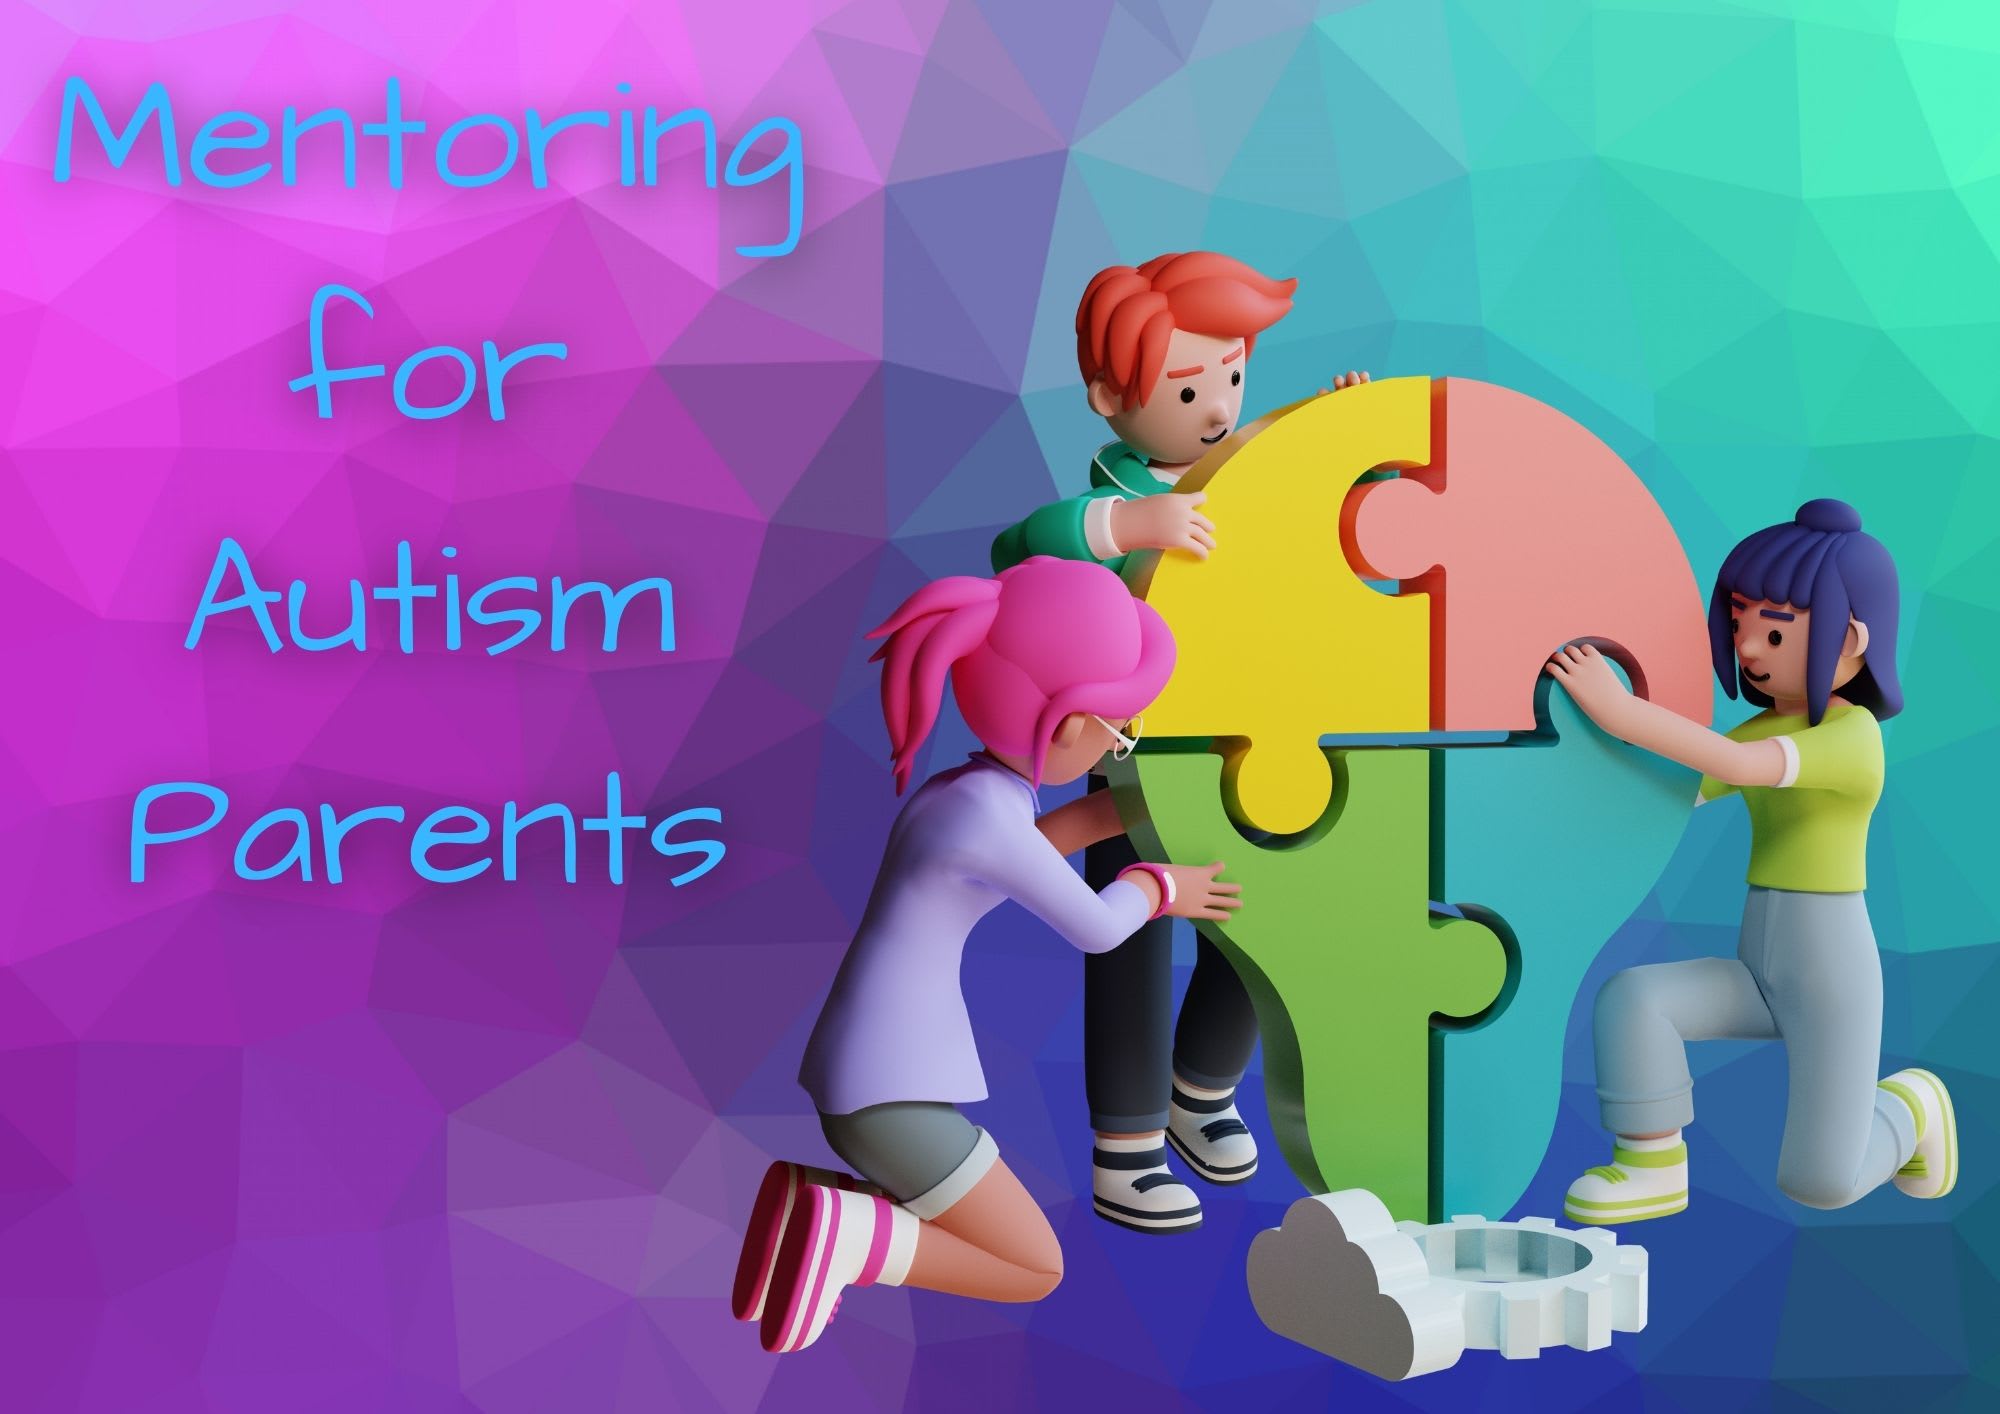 Mentor autism parents in navigating the diagnosis and challenges by  Arianhro | Fiverr